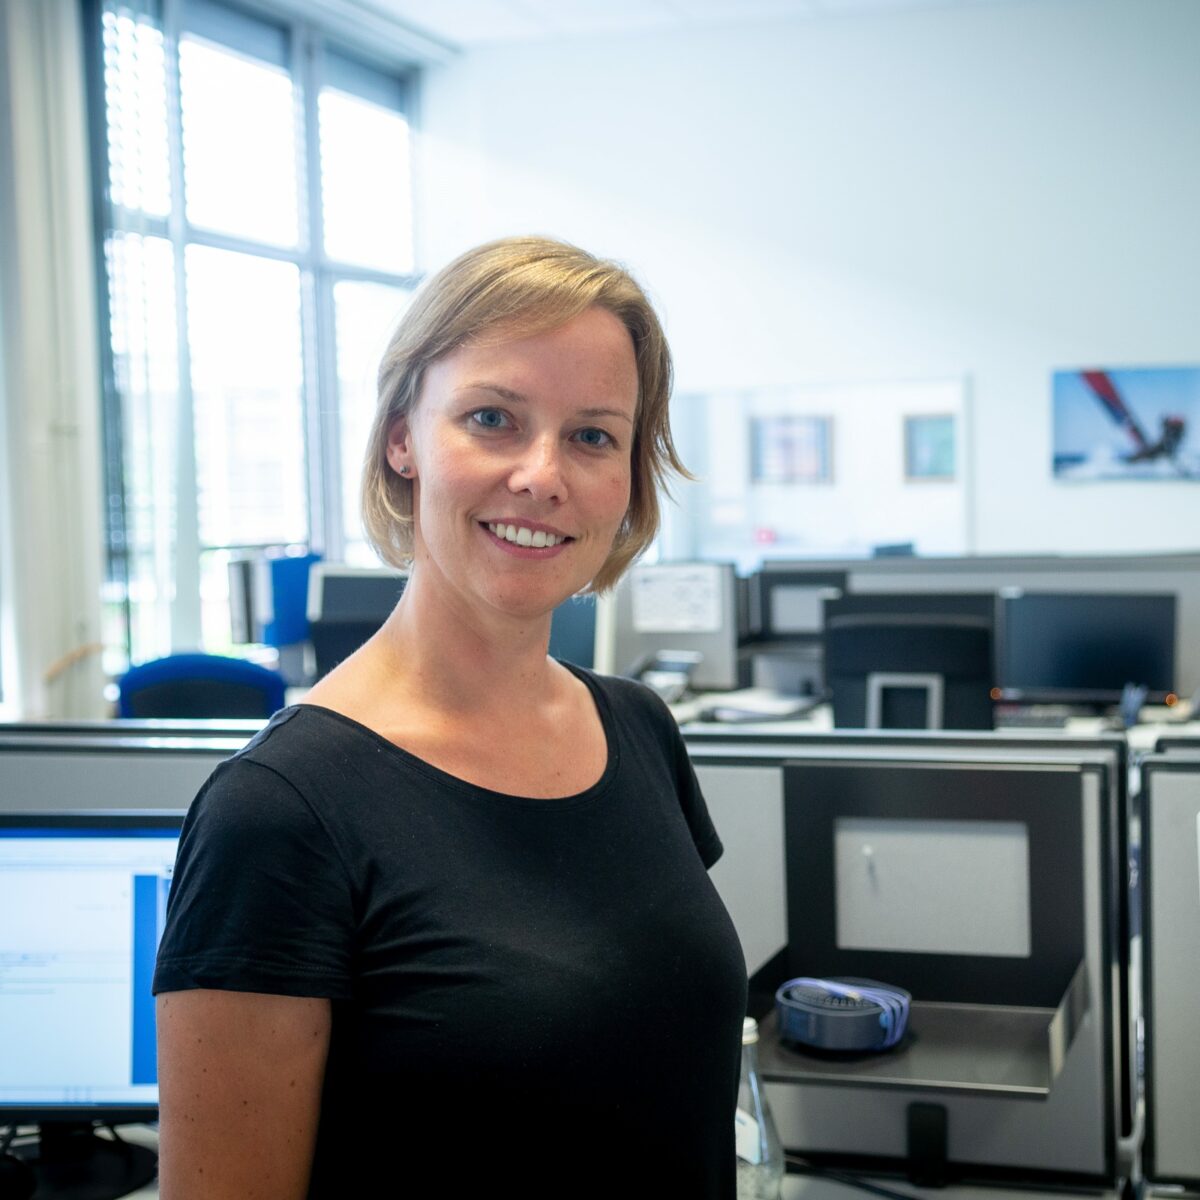 Portrait of an employee in the office of Koenig und Bauer AG